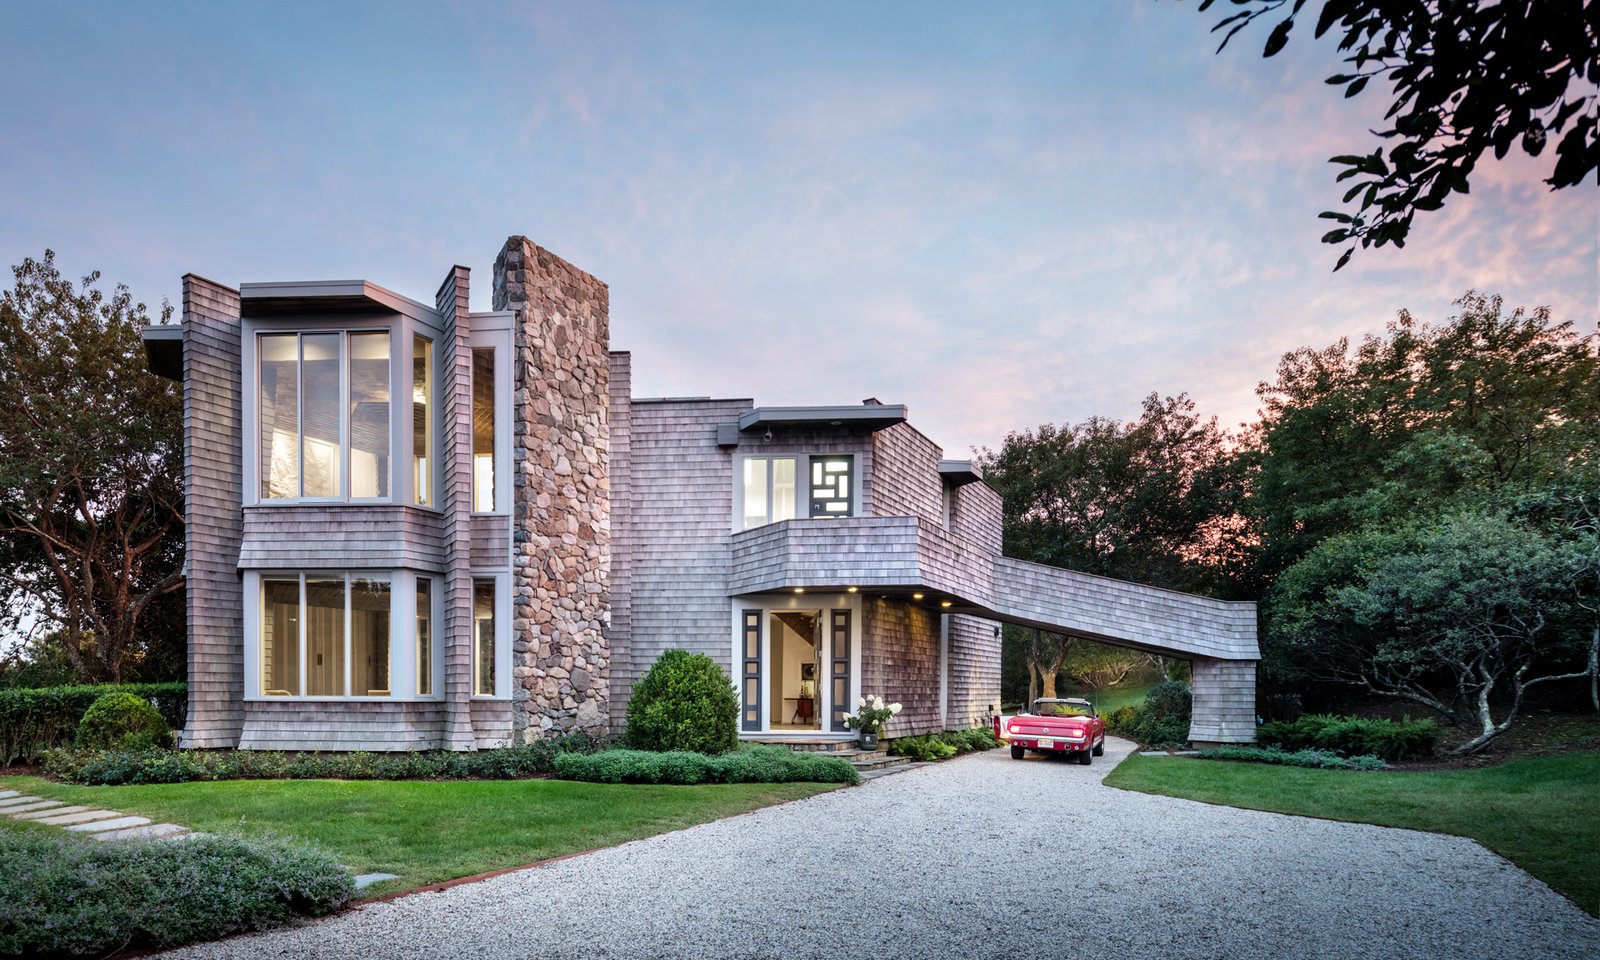 Located on 3.5 acres, the four-bedroom, three-and-a-half-bath home rests on top of a hill and is nestled up against the Montauk Point State Park.